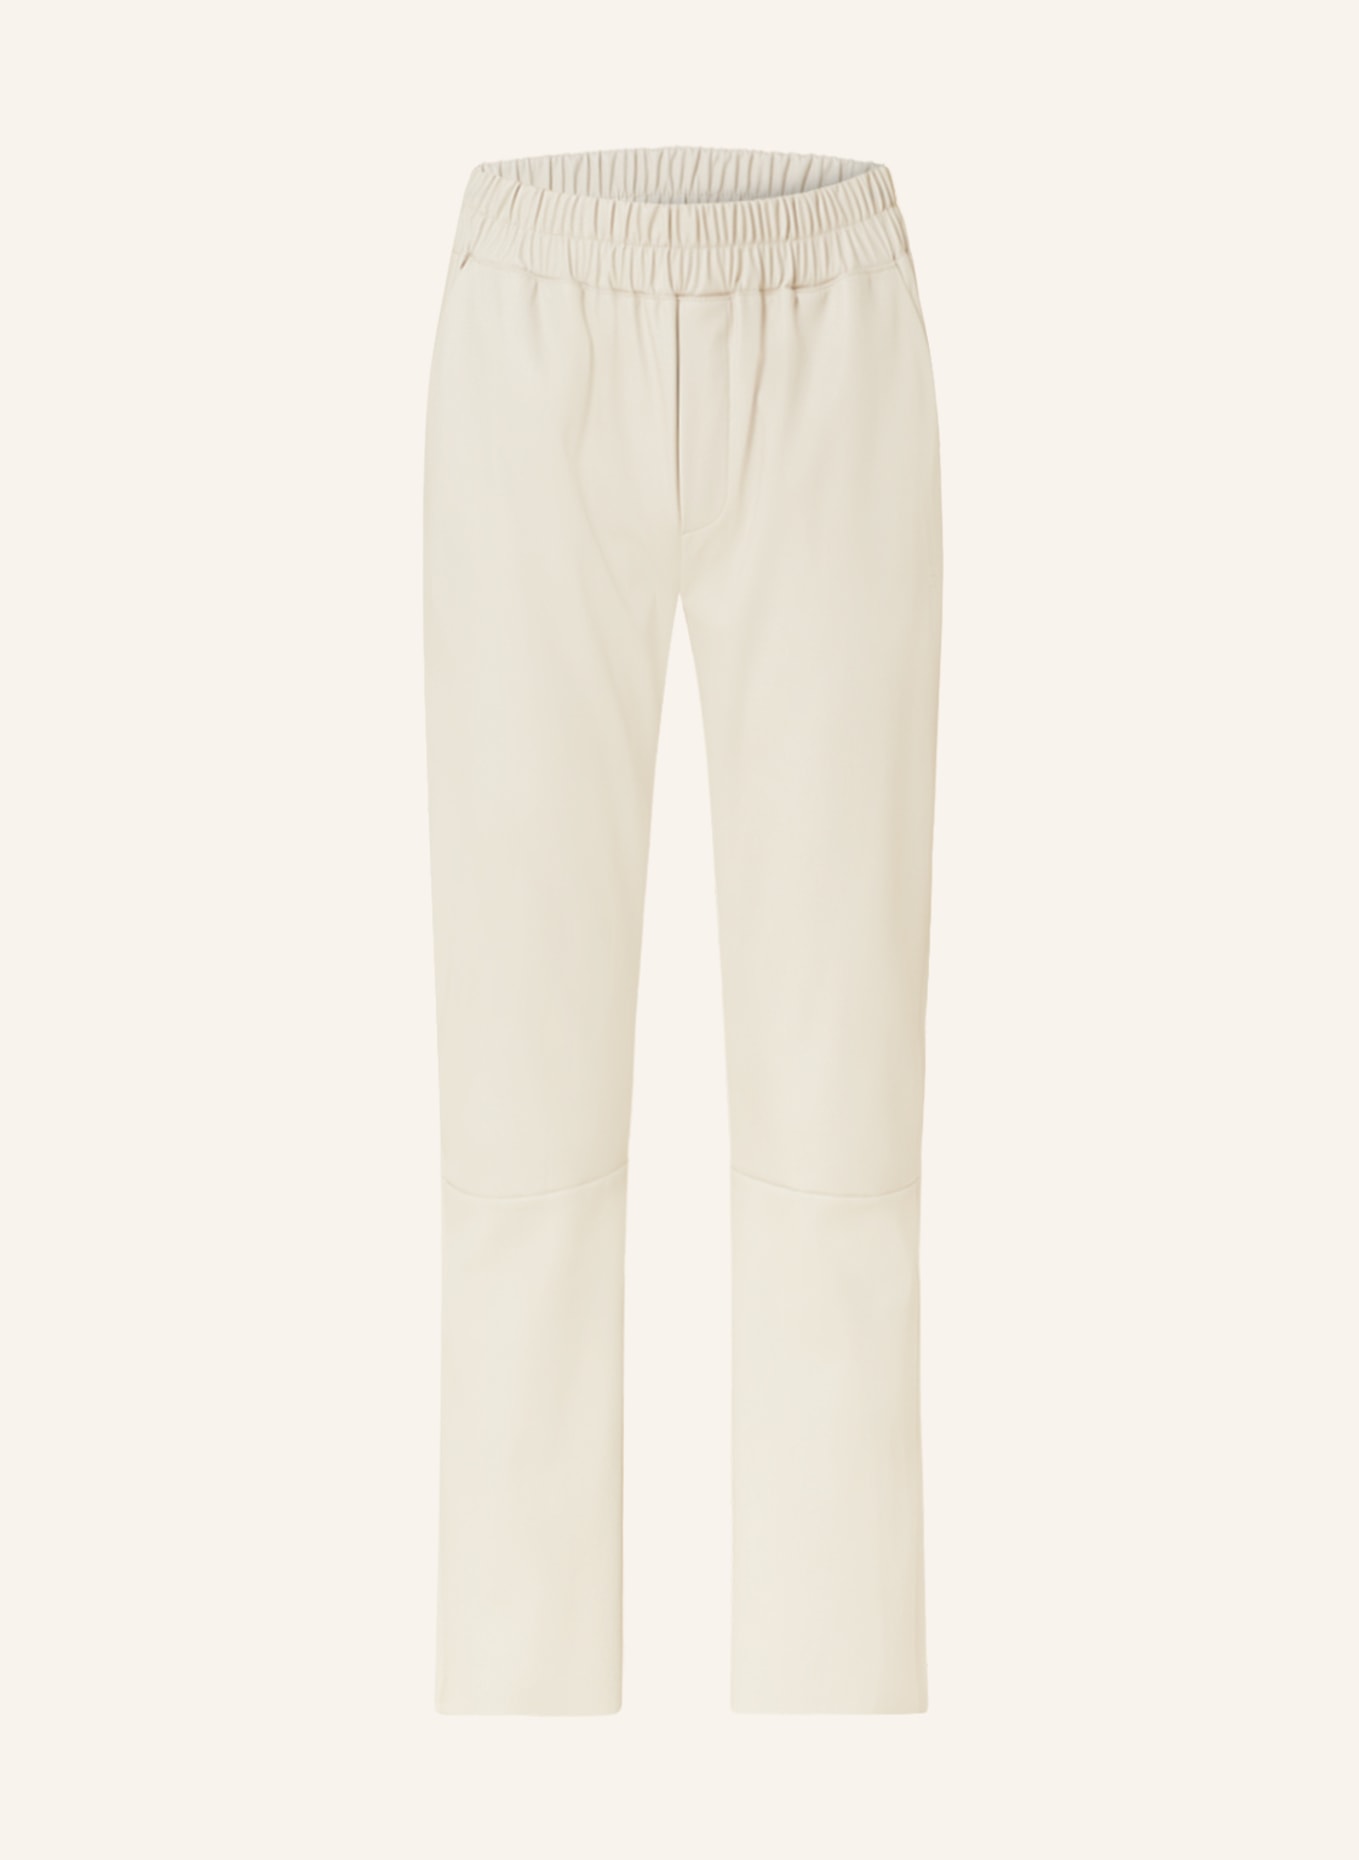 10DAYS Pants in leather look, Color: CREAM (Image 1)